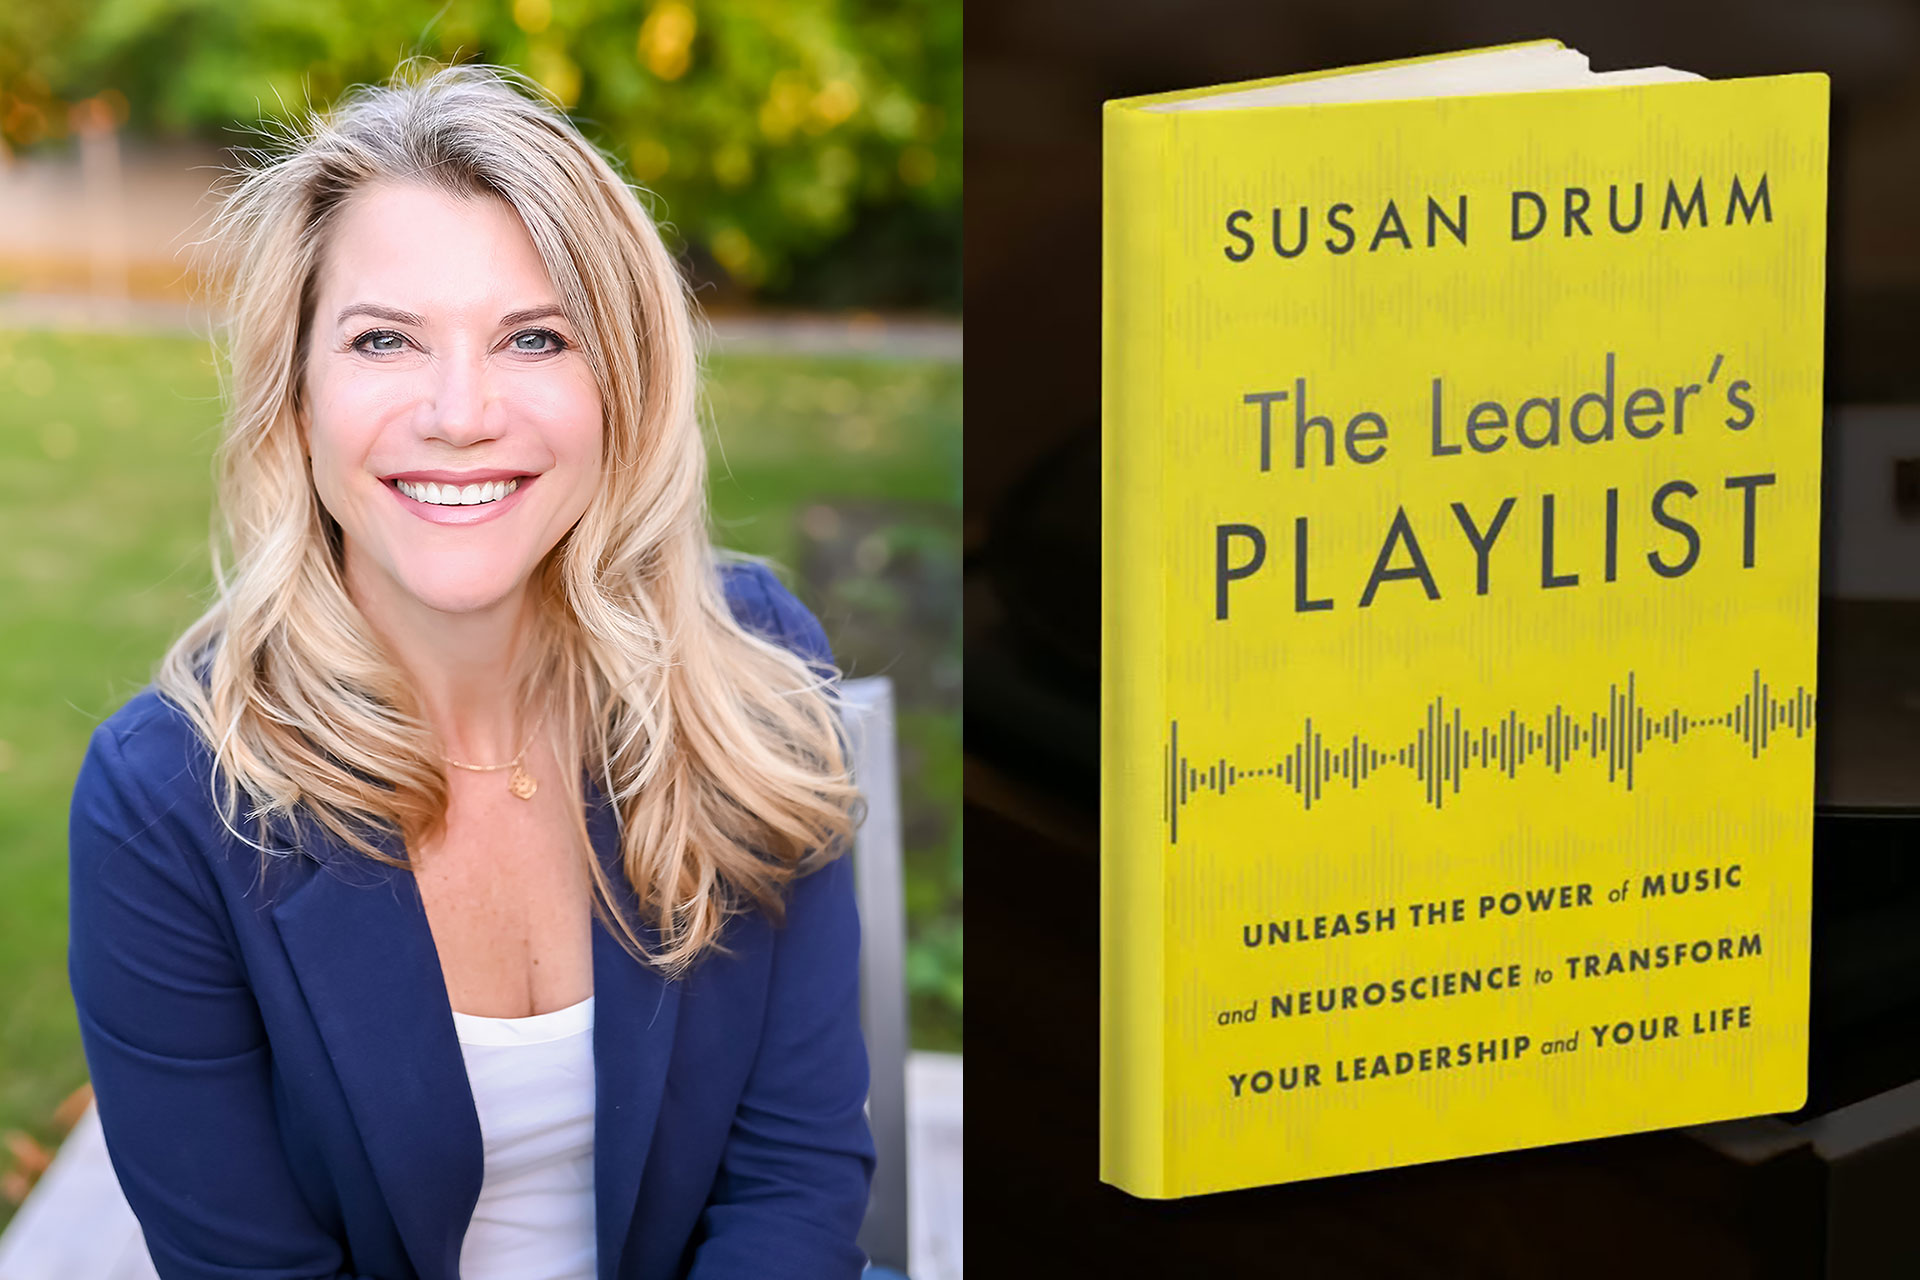 Meet the Author Taking a Musical Approach to Successful Leadership Skills - readwrite.com